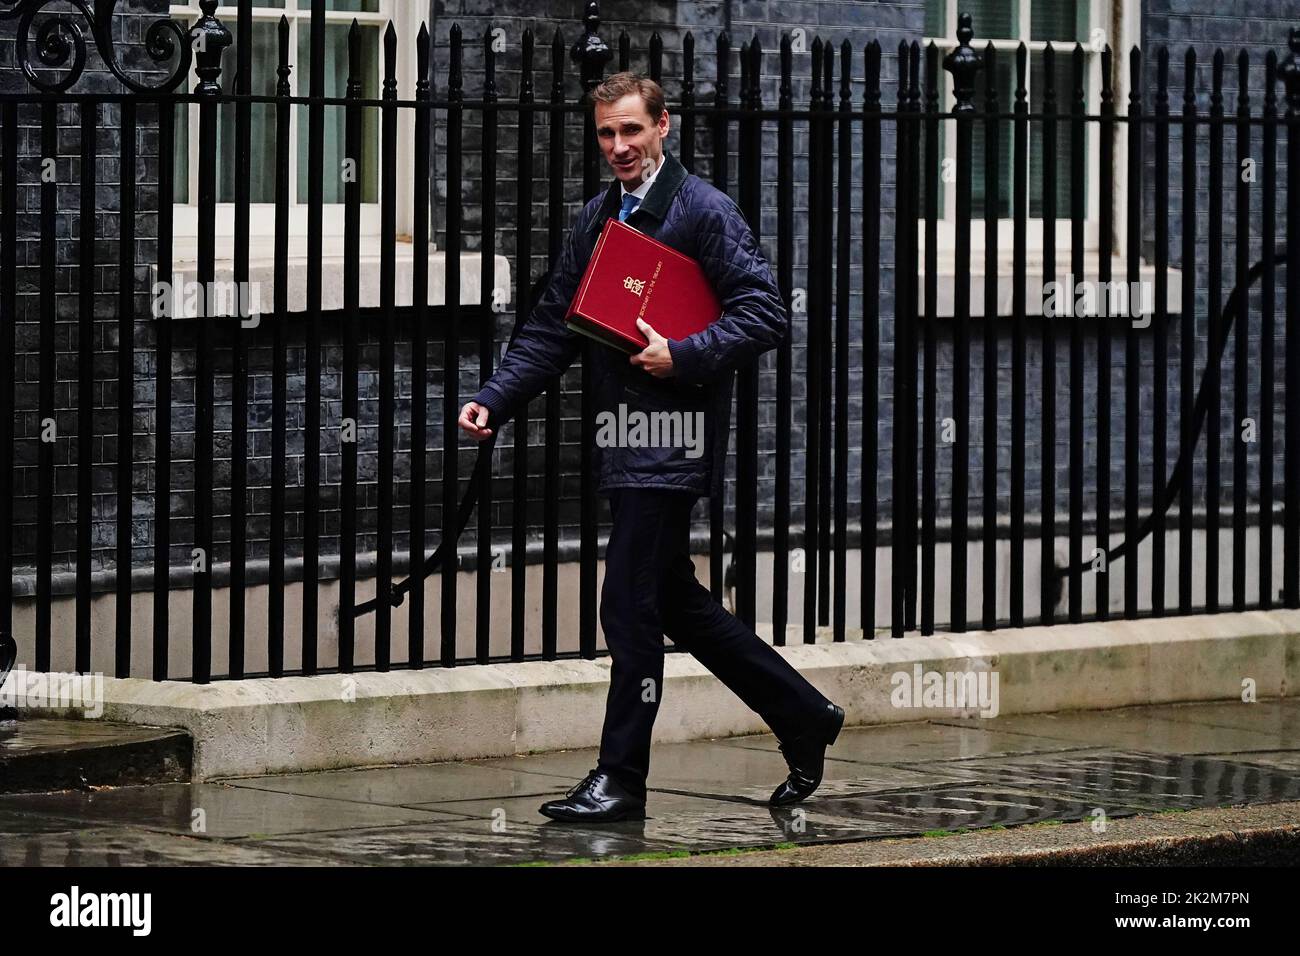 Chief Secretary to the Treasury Chris Philp arrives for a cabinet meeting at 10 Downing Street, London, ahead of a mini-budget announcement by Chancellor of the Exchequer Kwasi Kwarteng. Picture date: Friday September 23, 2022. Stock Photo